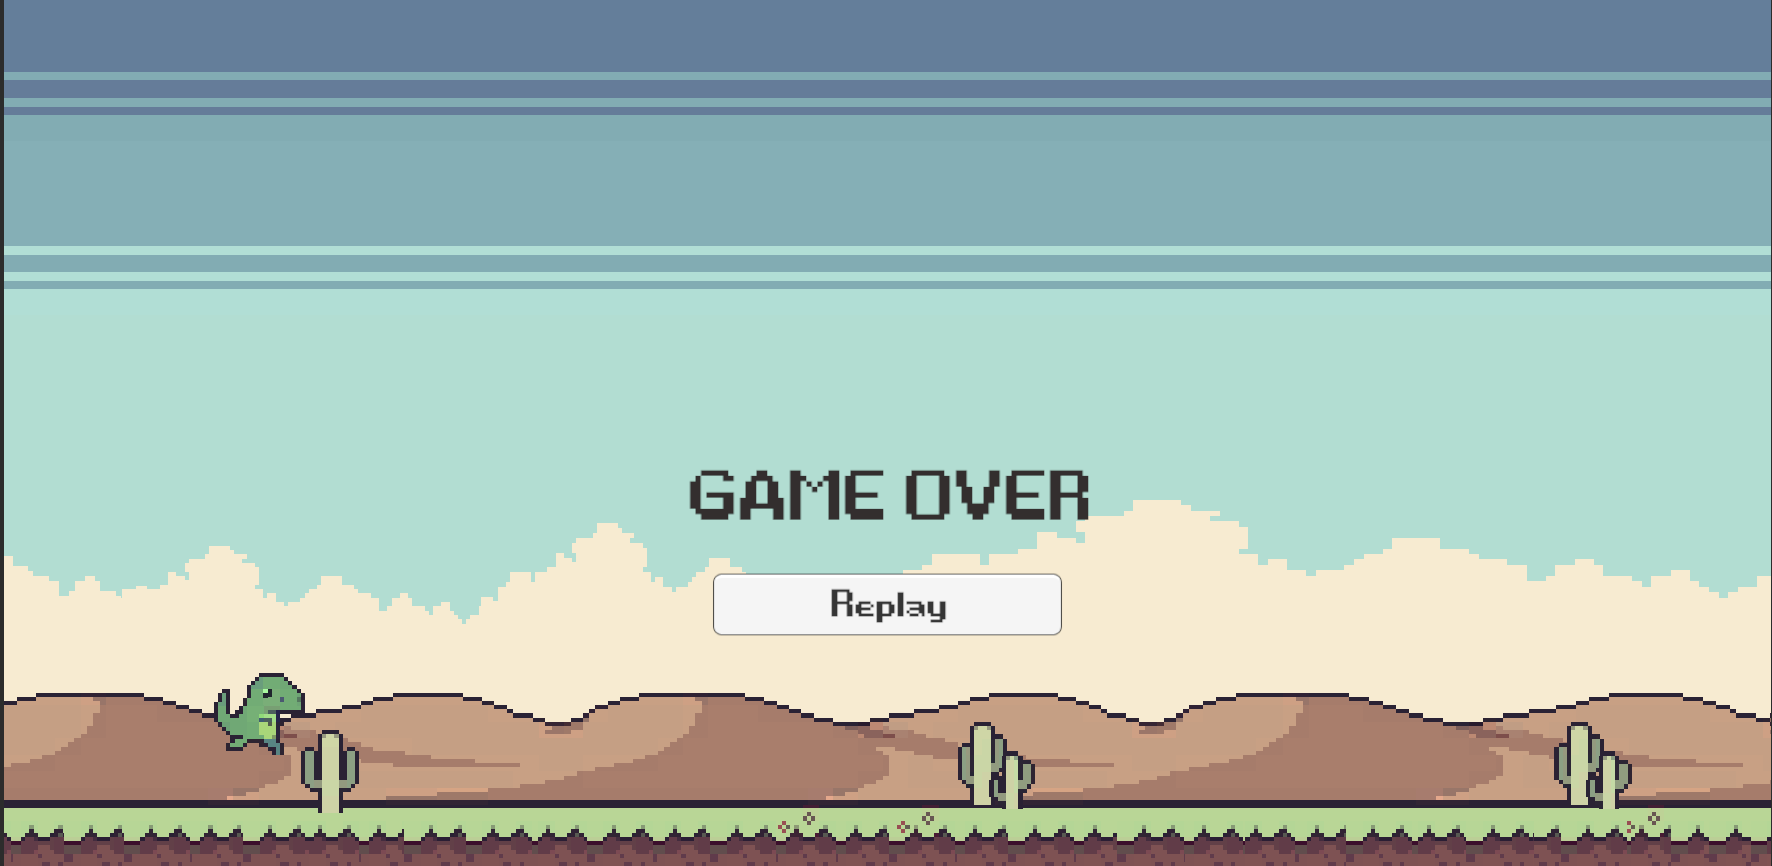 Game Over Popup appears with Replay button